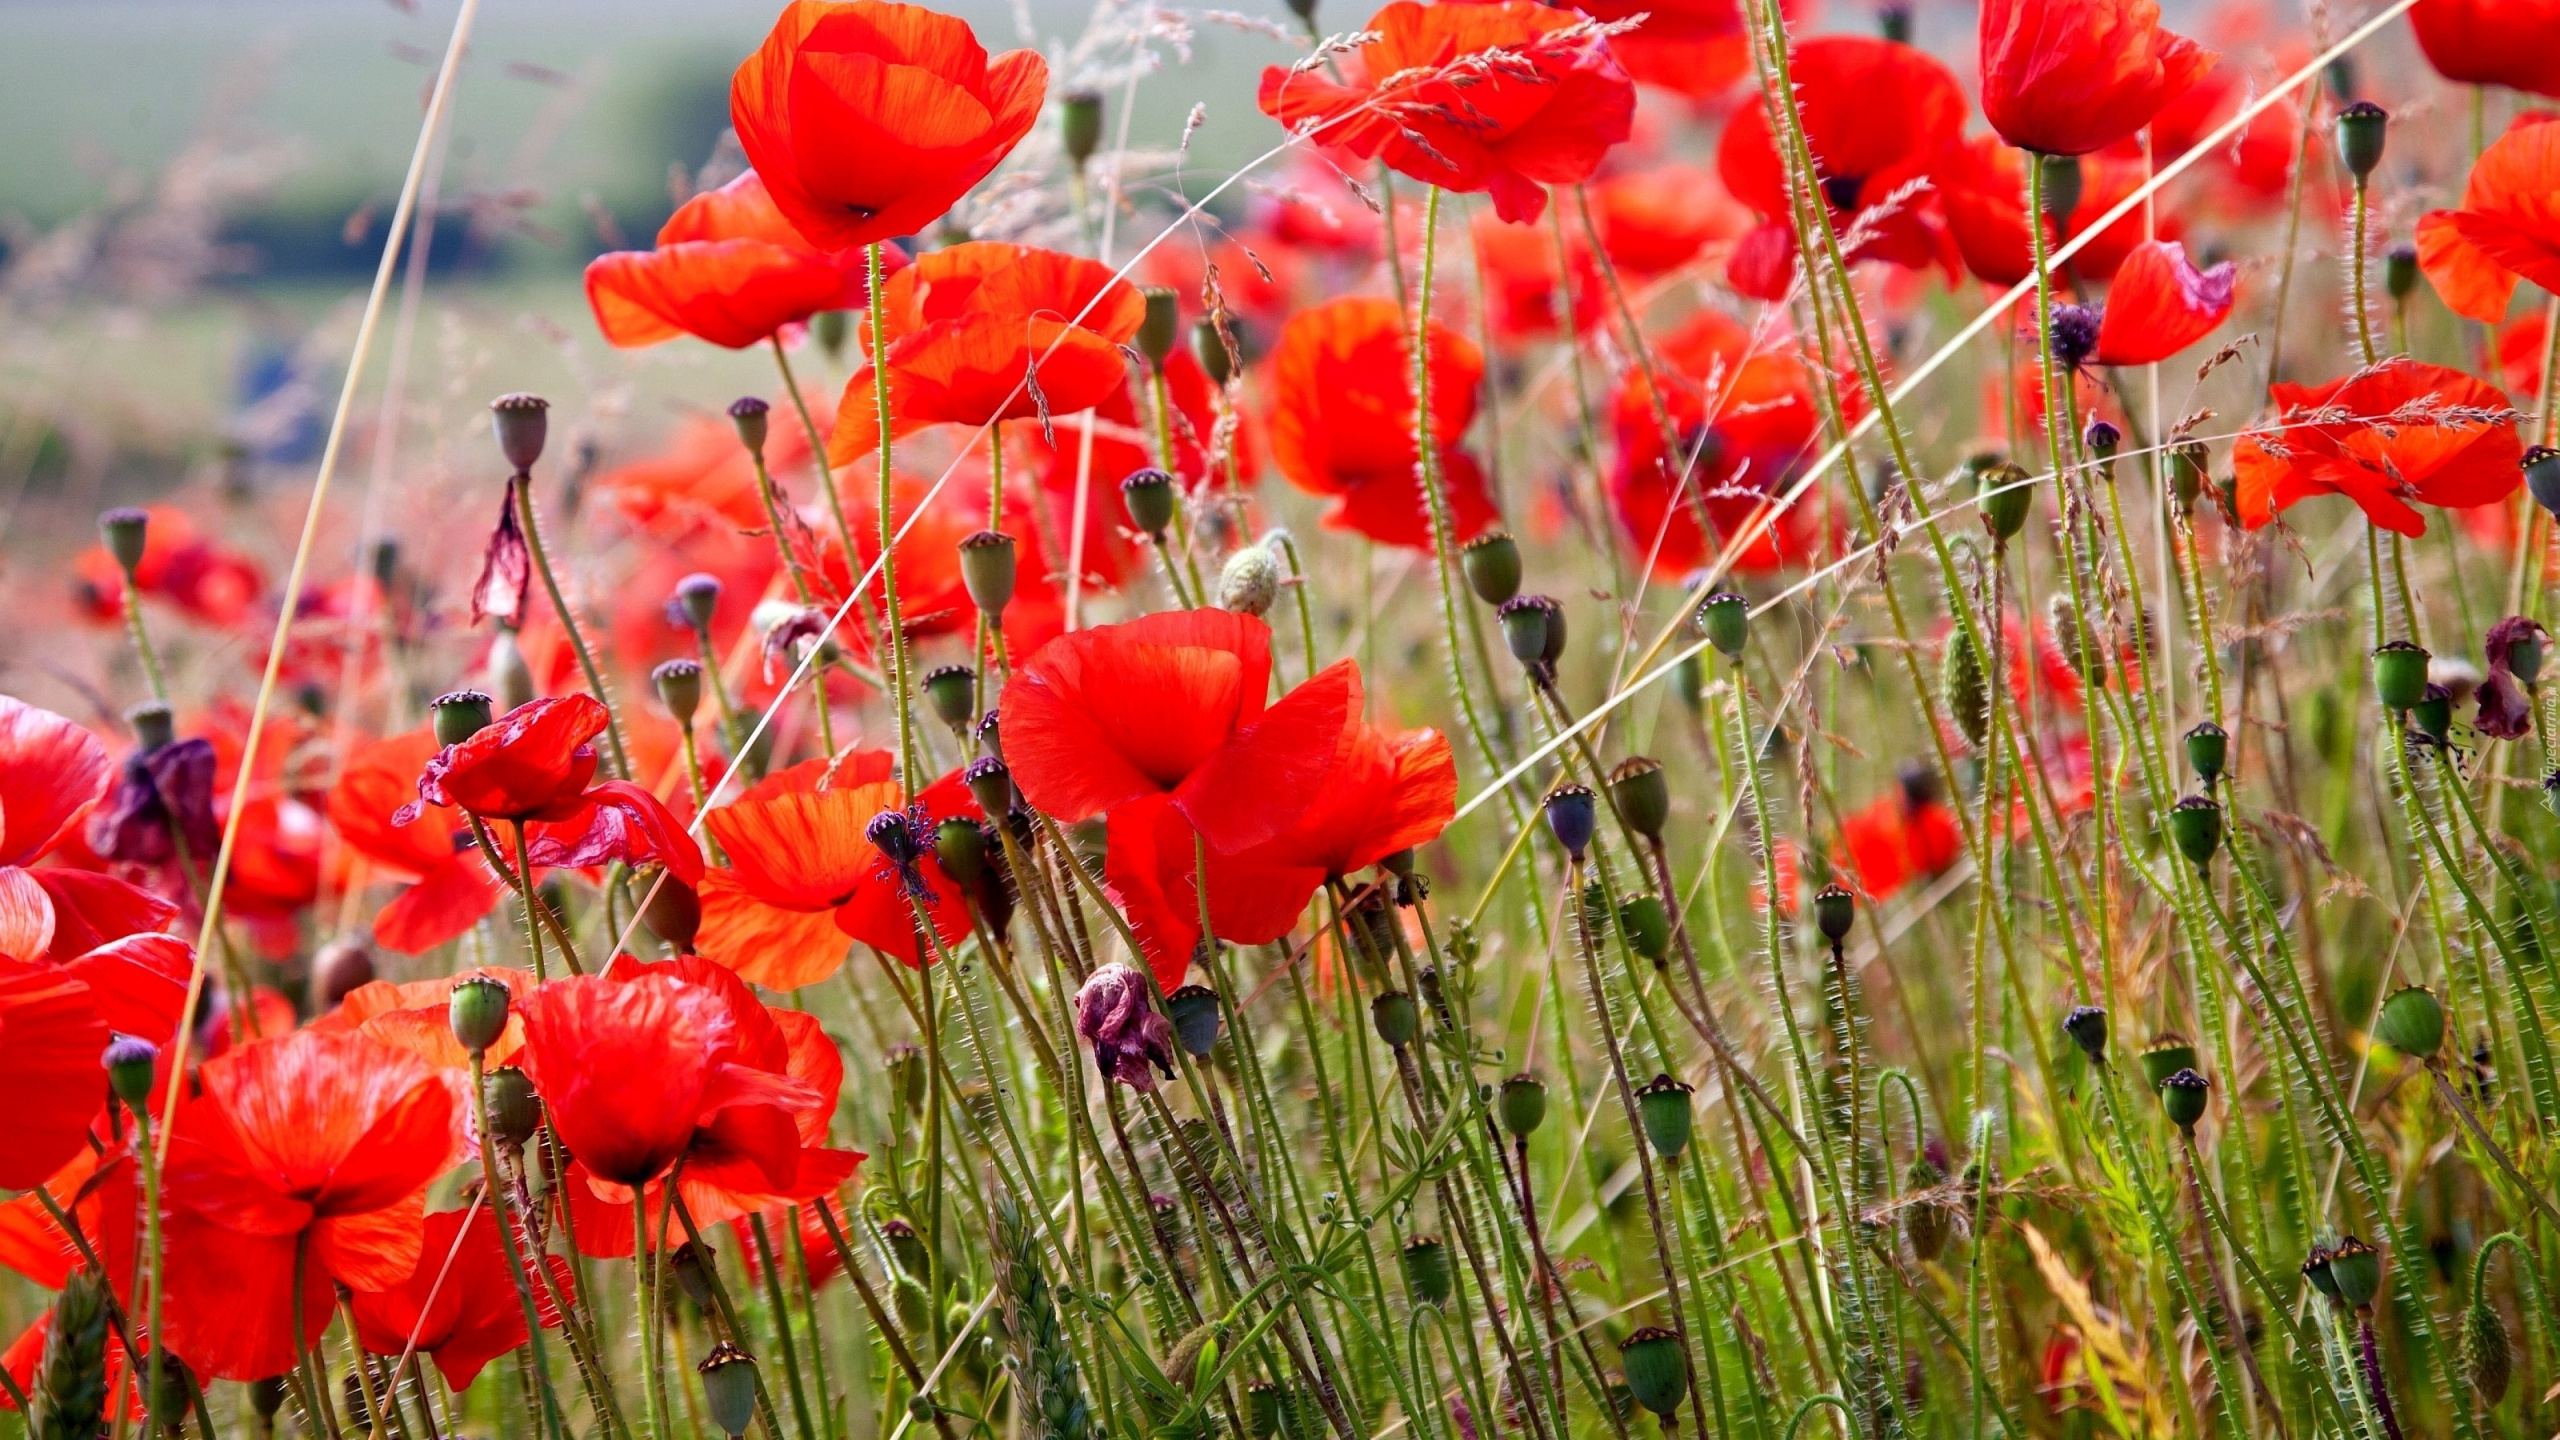 Red Flowers on Green Grass Field During Daytime. Wallpaper in 2560x1440 Resolution